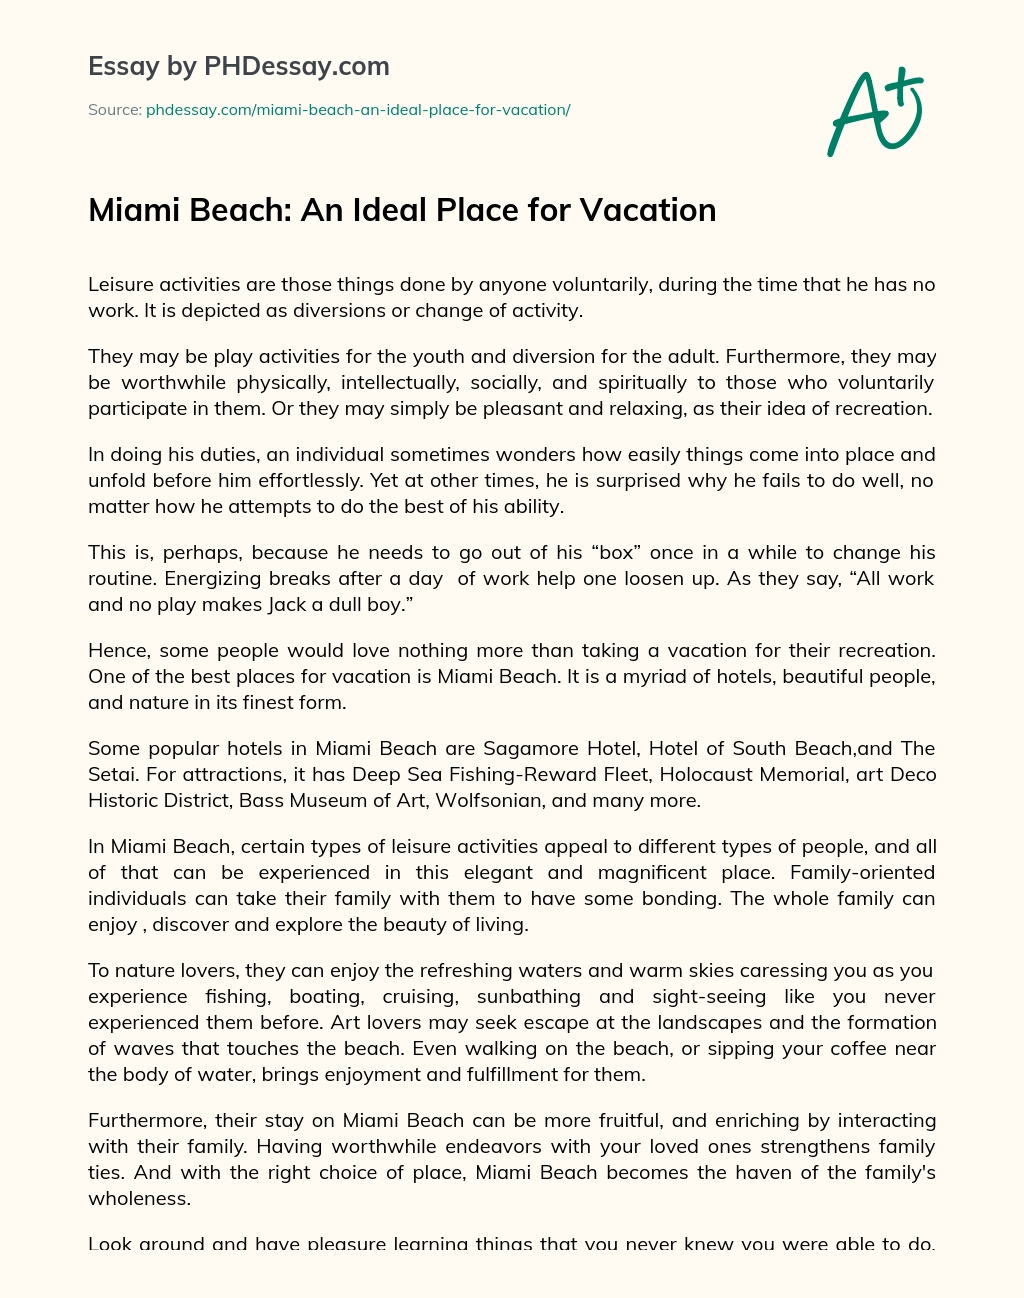 Miami Beach: An Ideal Place for Vacation essay